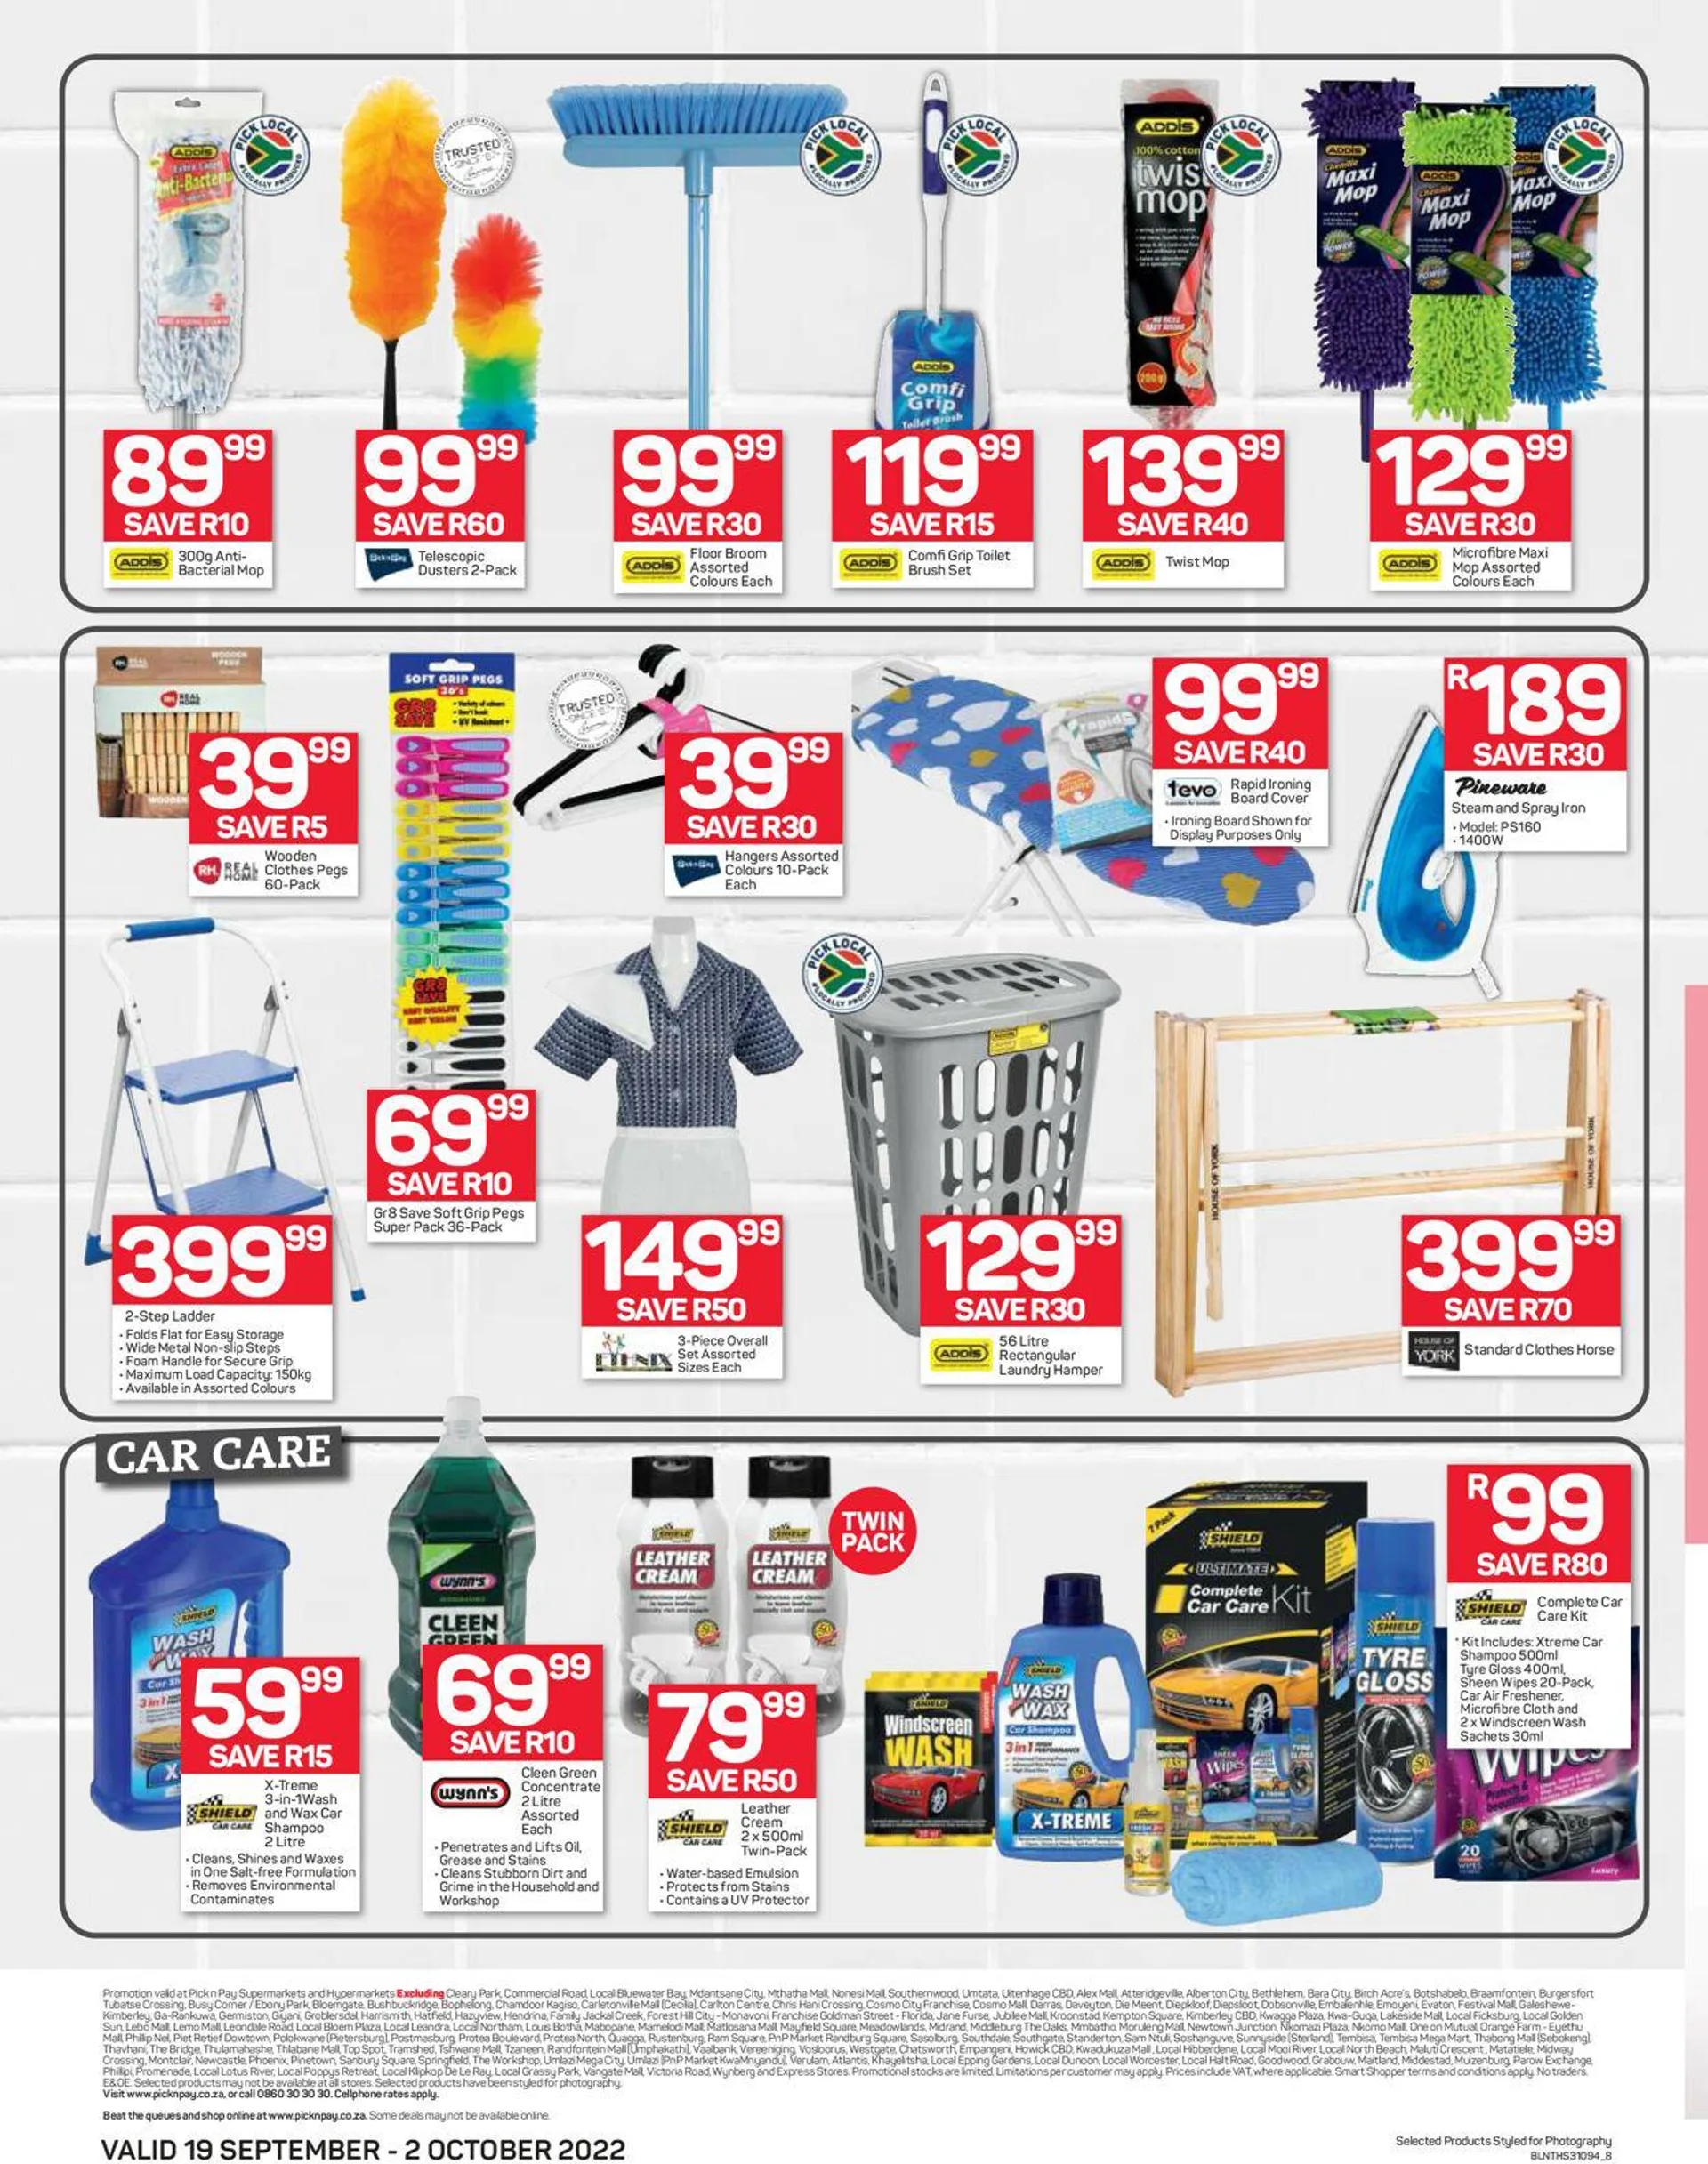 Pick n Pay Current catalogue - 8